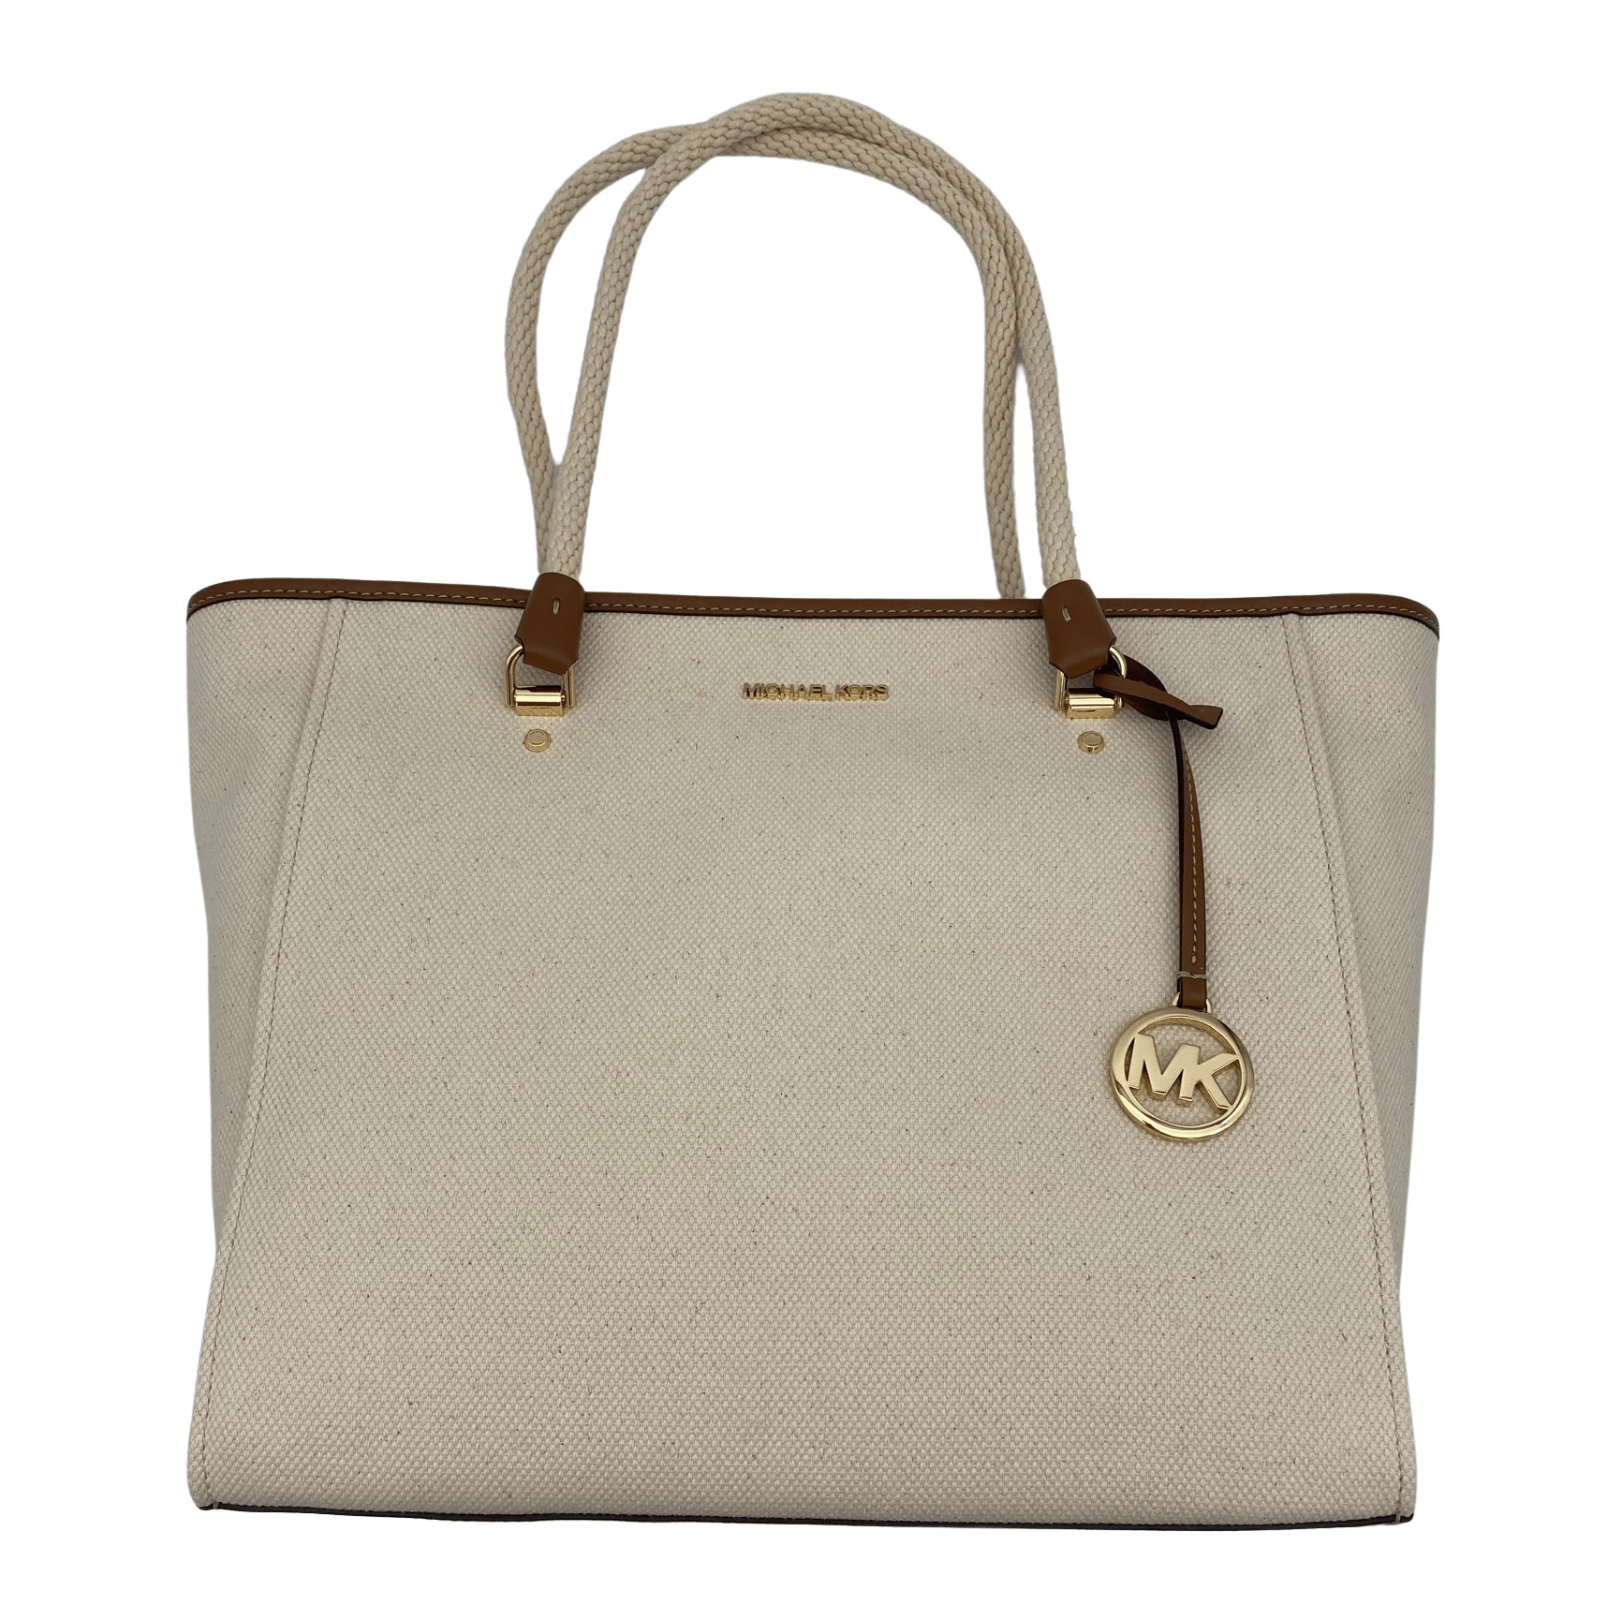 Michael Kors Blakely Large Canvas Tote Bag- Natural New W/Tags